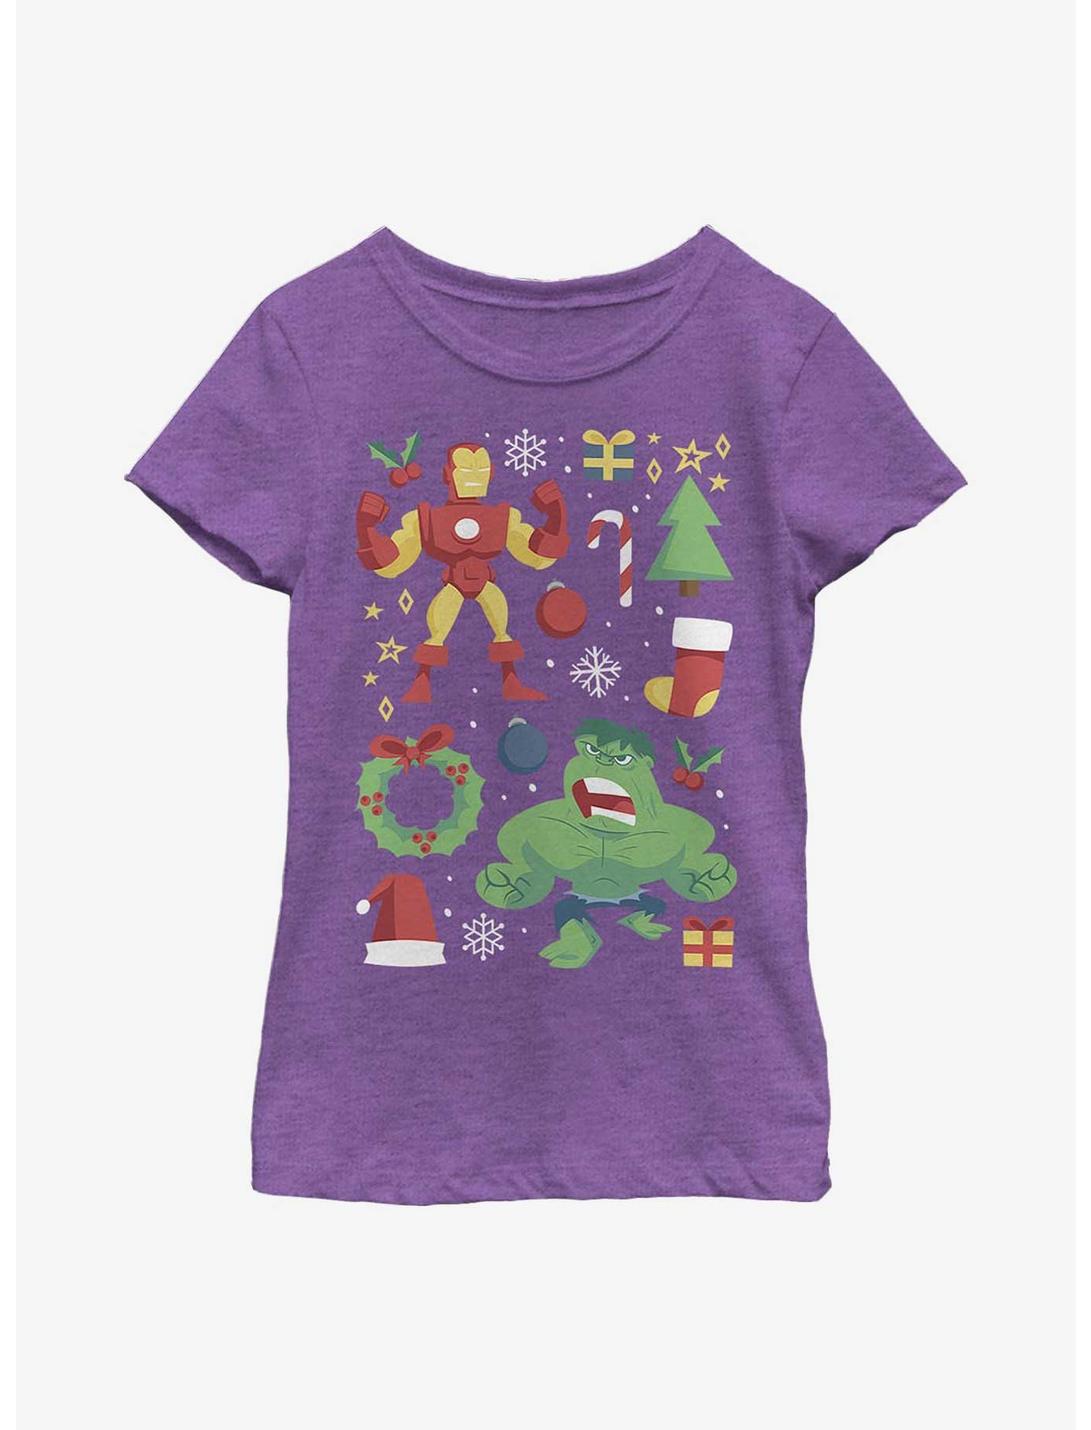 Marvel Avengers Holiday Cheer Youth Girls T-Shirt, PURPLE BERRY, hi-res